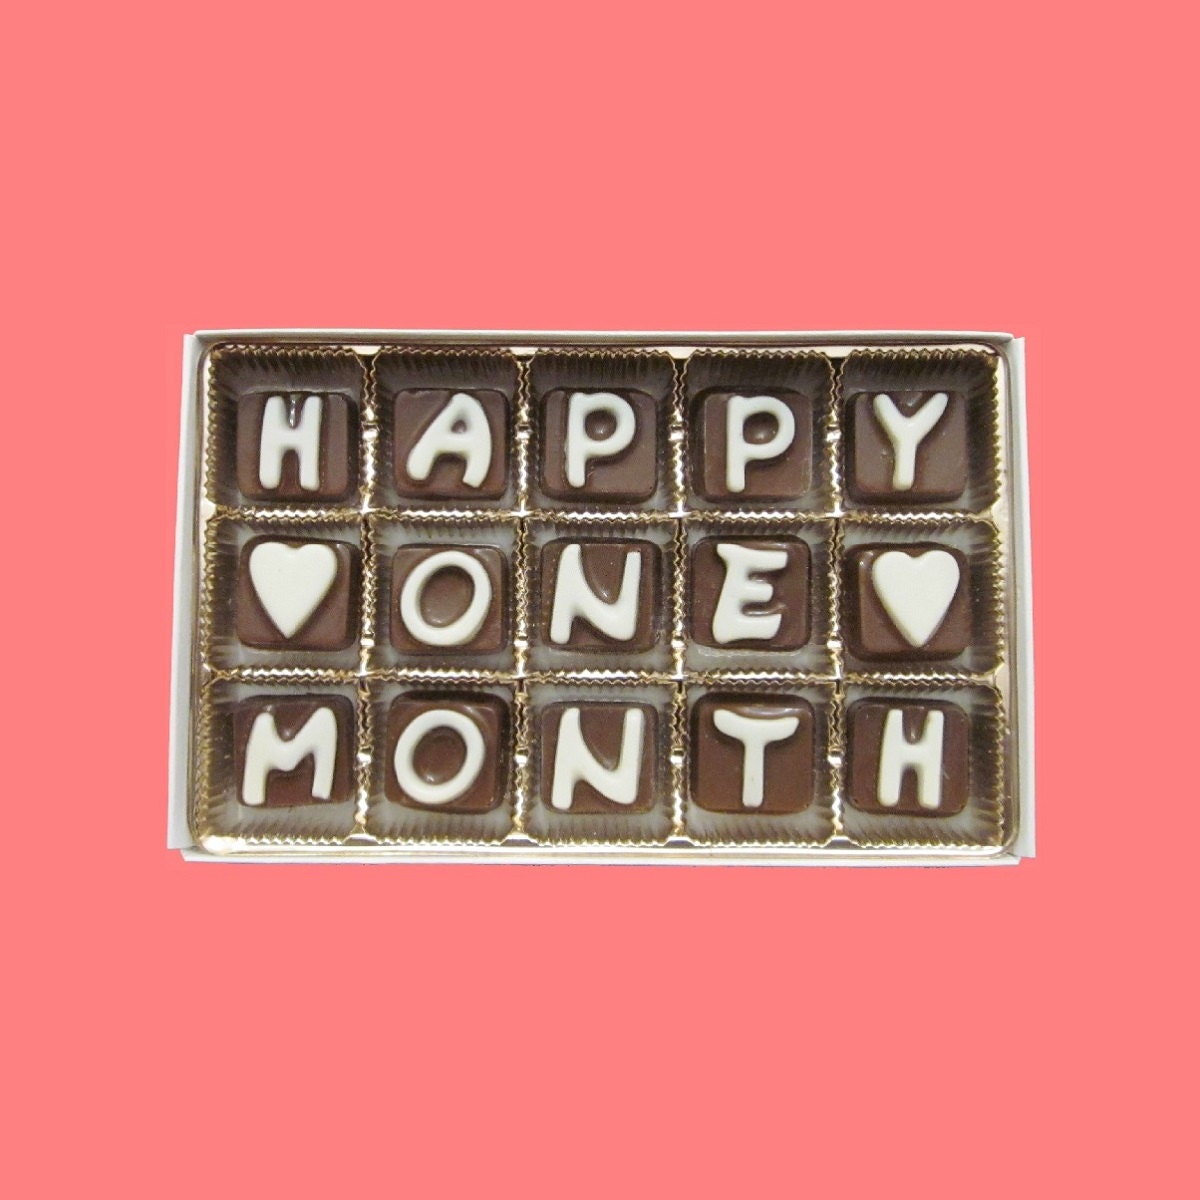 One Month Anniversary Gifts
 e Month Anniversary Gift Happy 1 Month Cubic Chocolate